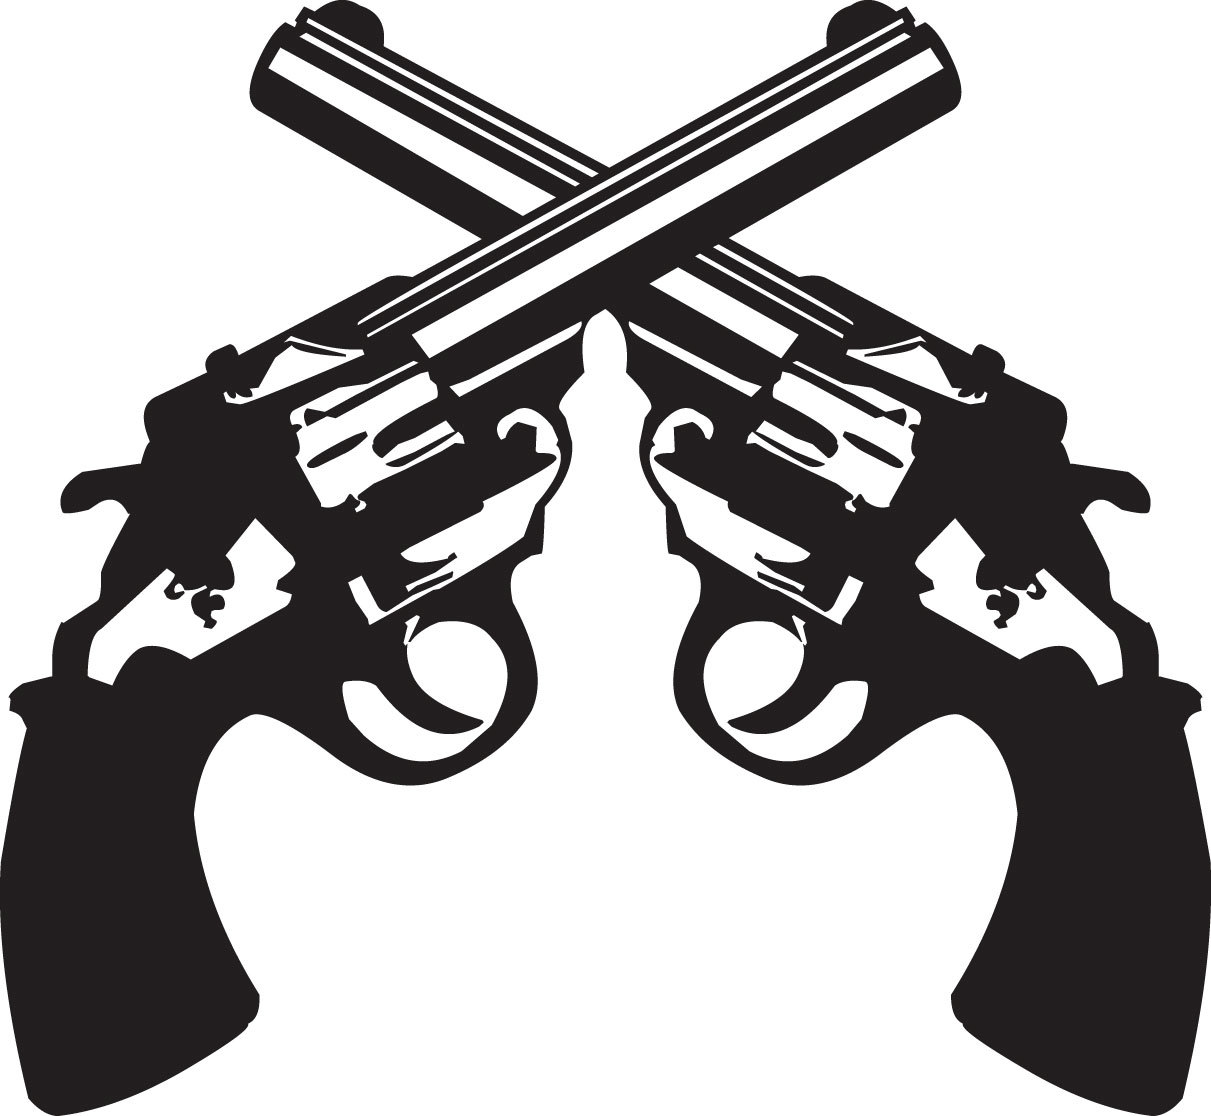 Free Crossed Guns Cliparts, Download Free Clip Art, Free